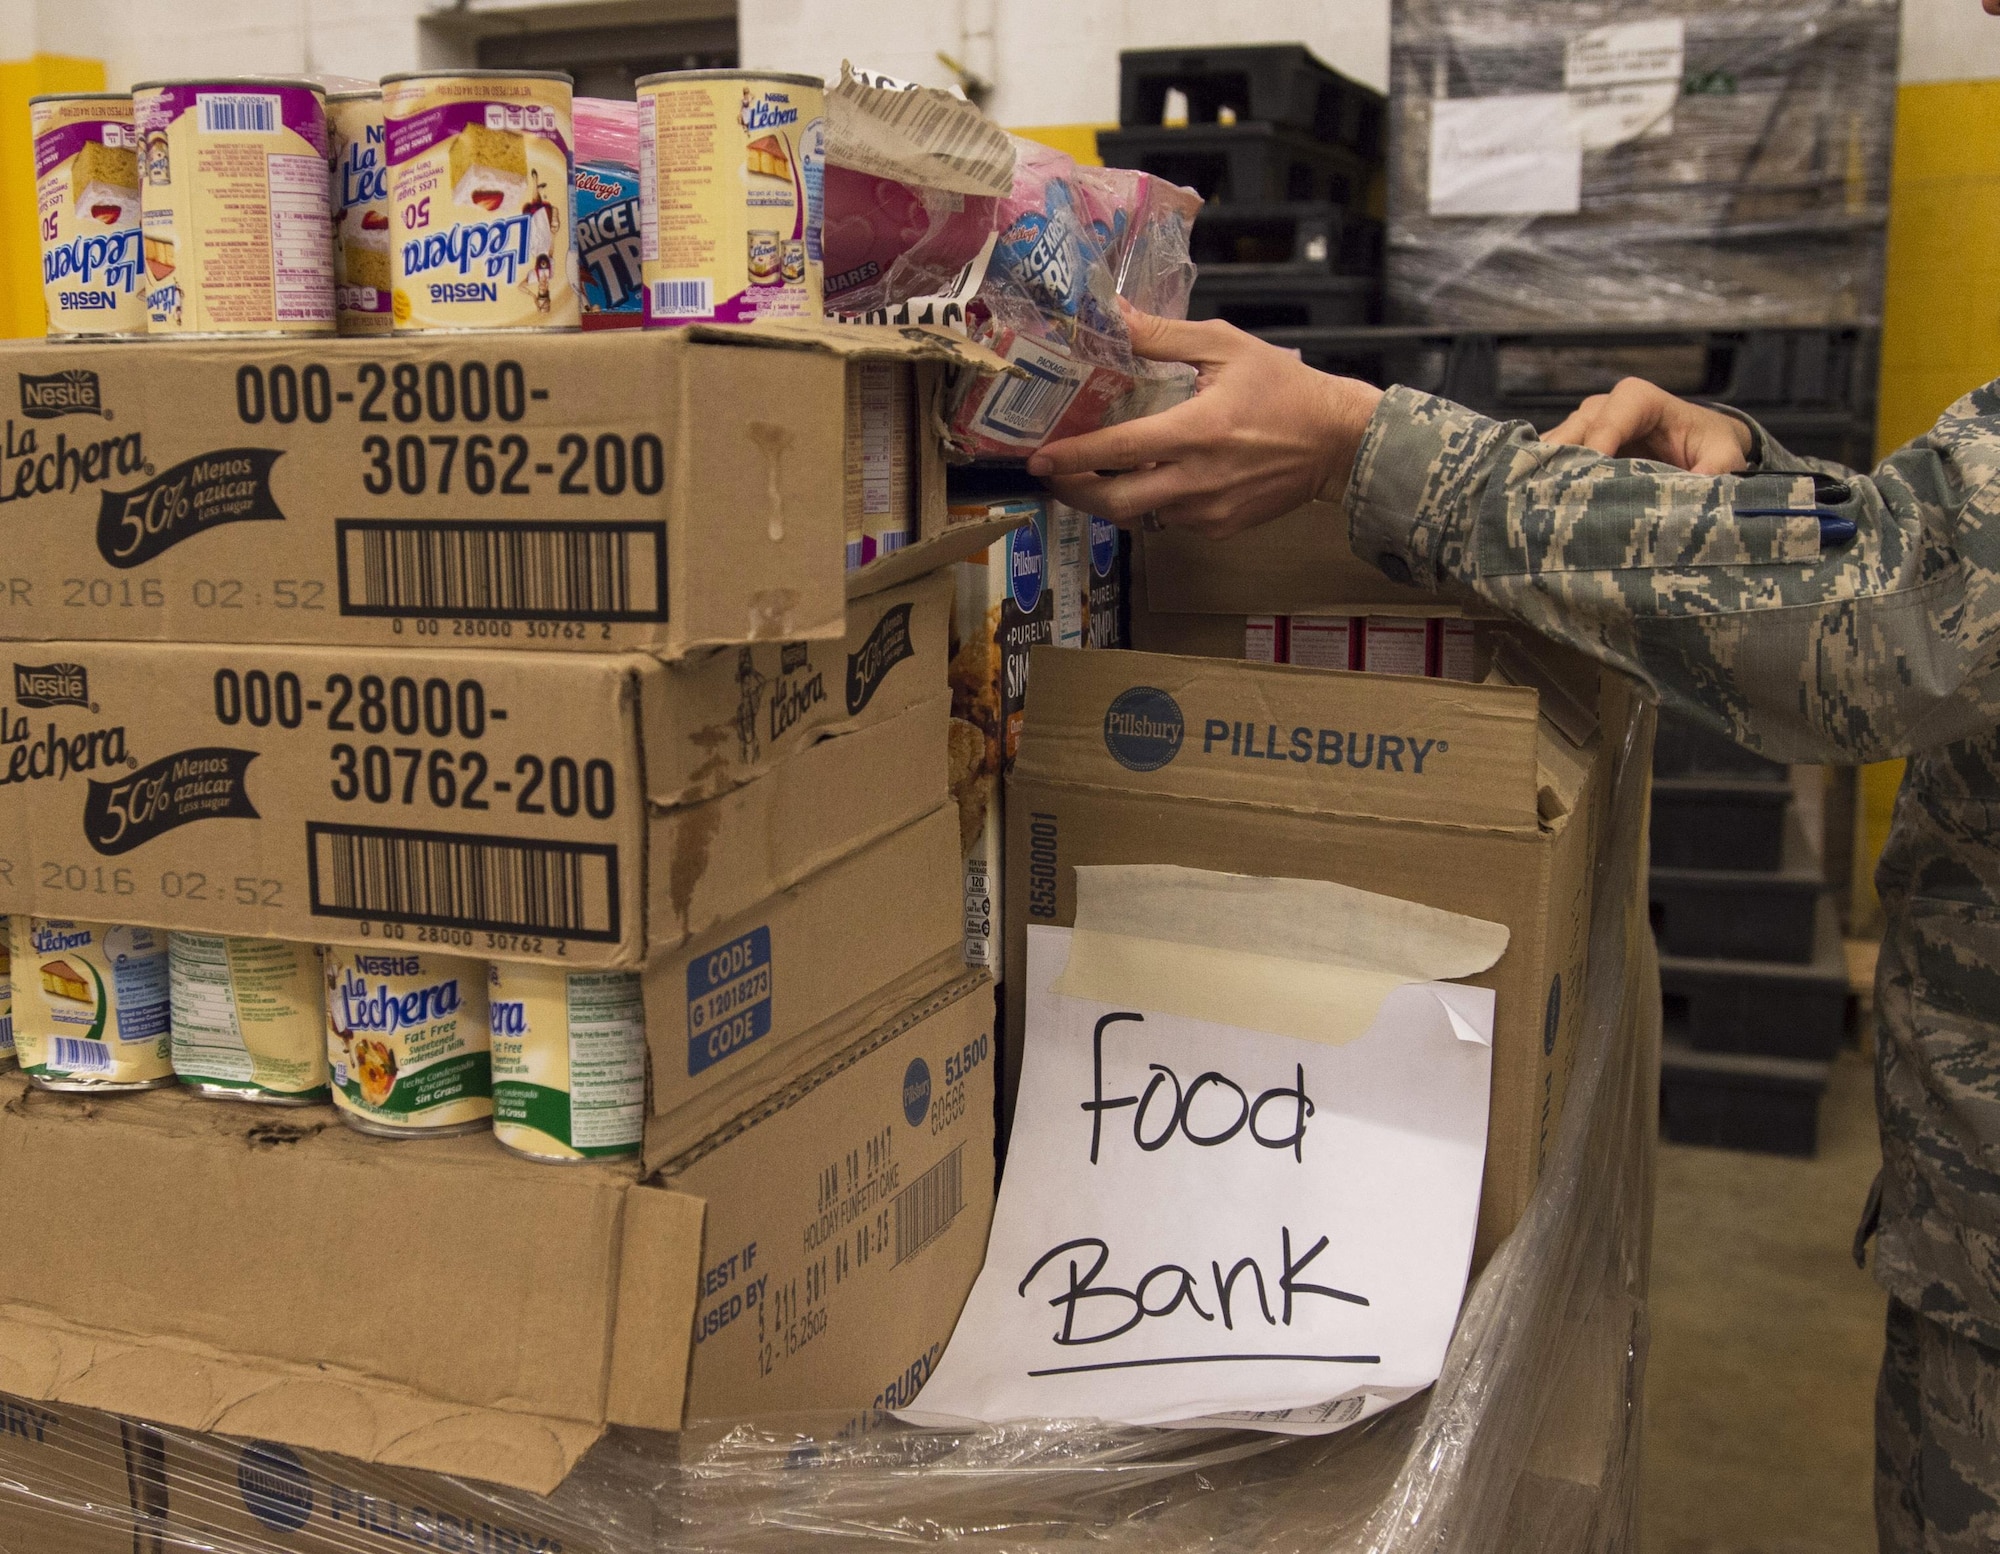 Capt. Carlos Cueto Diaz, Joint Base Andrews’ food bank liaison, adjusts donated goods at the commissary at JBA, Maryland, April 7, 2016. In the last year, JBA has contributed nearly 10,000 pounds of food as part of the Defense Commissary Agency’s established process for covering diversion of unsellable but edible food to local food banks.  (Photo by Senior Airman Nesha Humes/RELEASED)